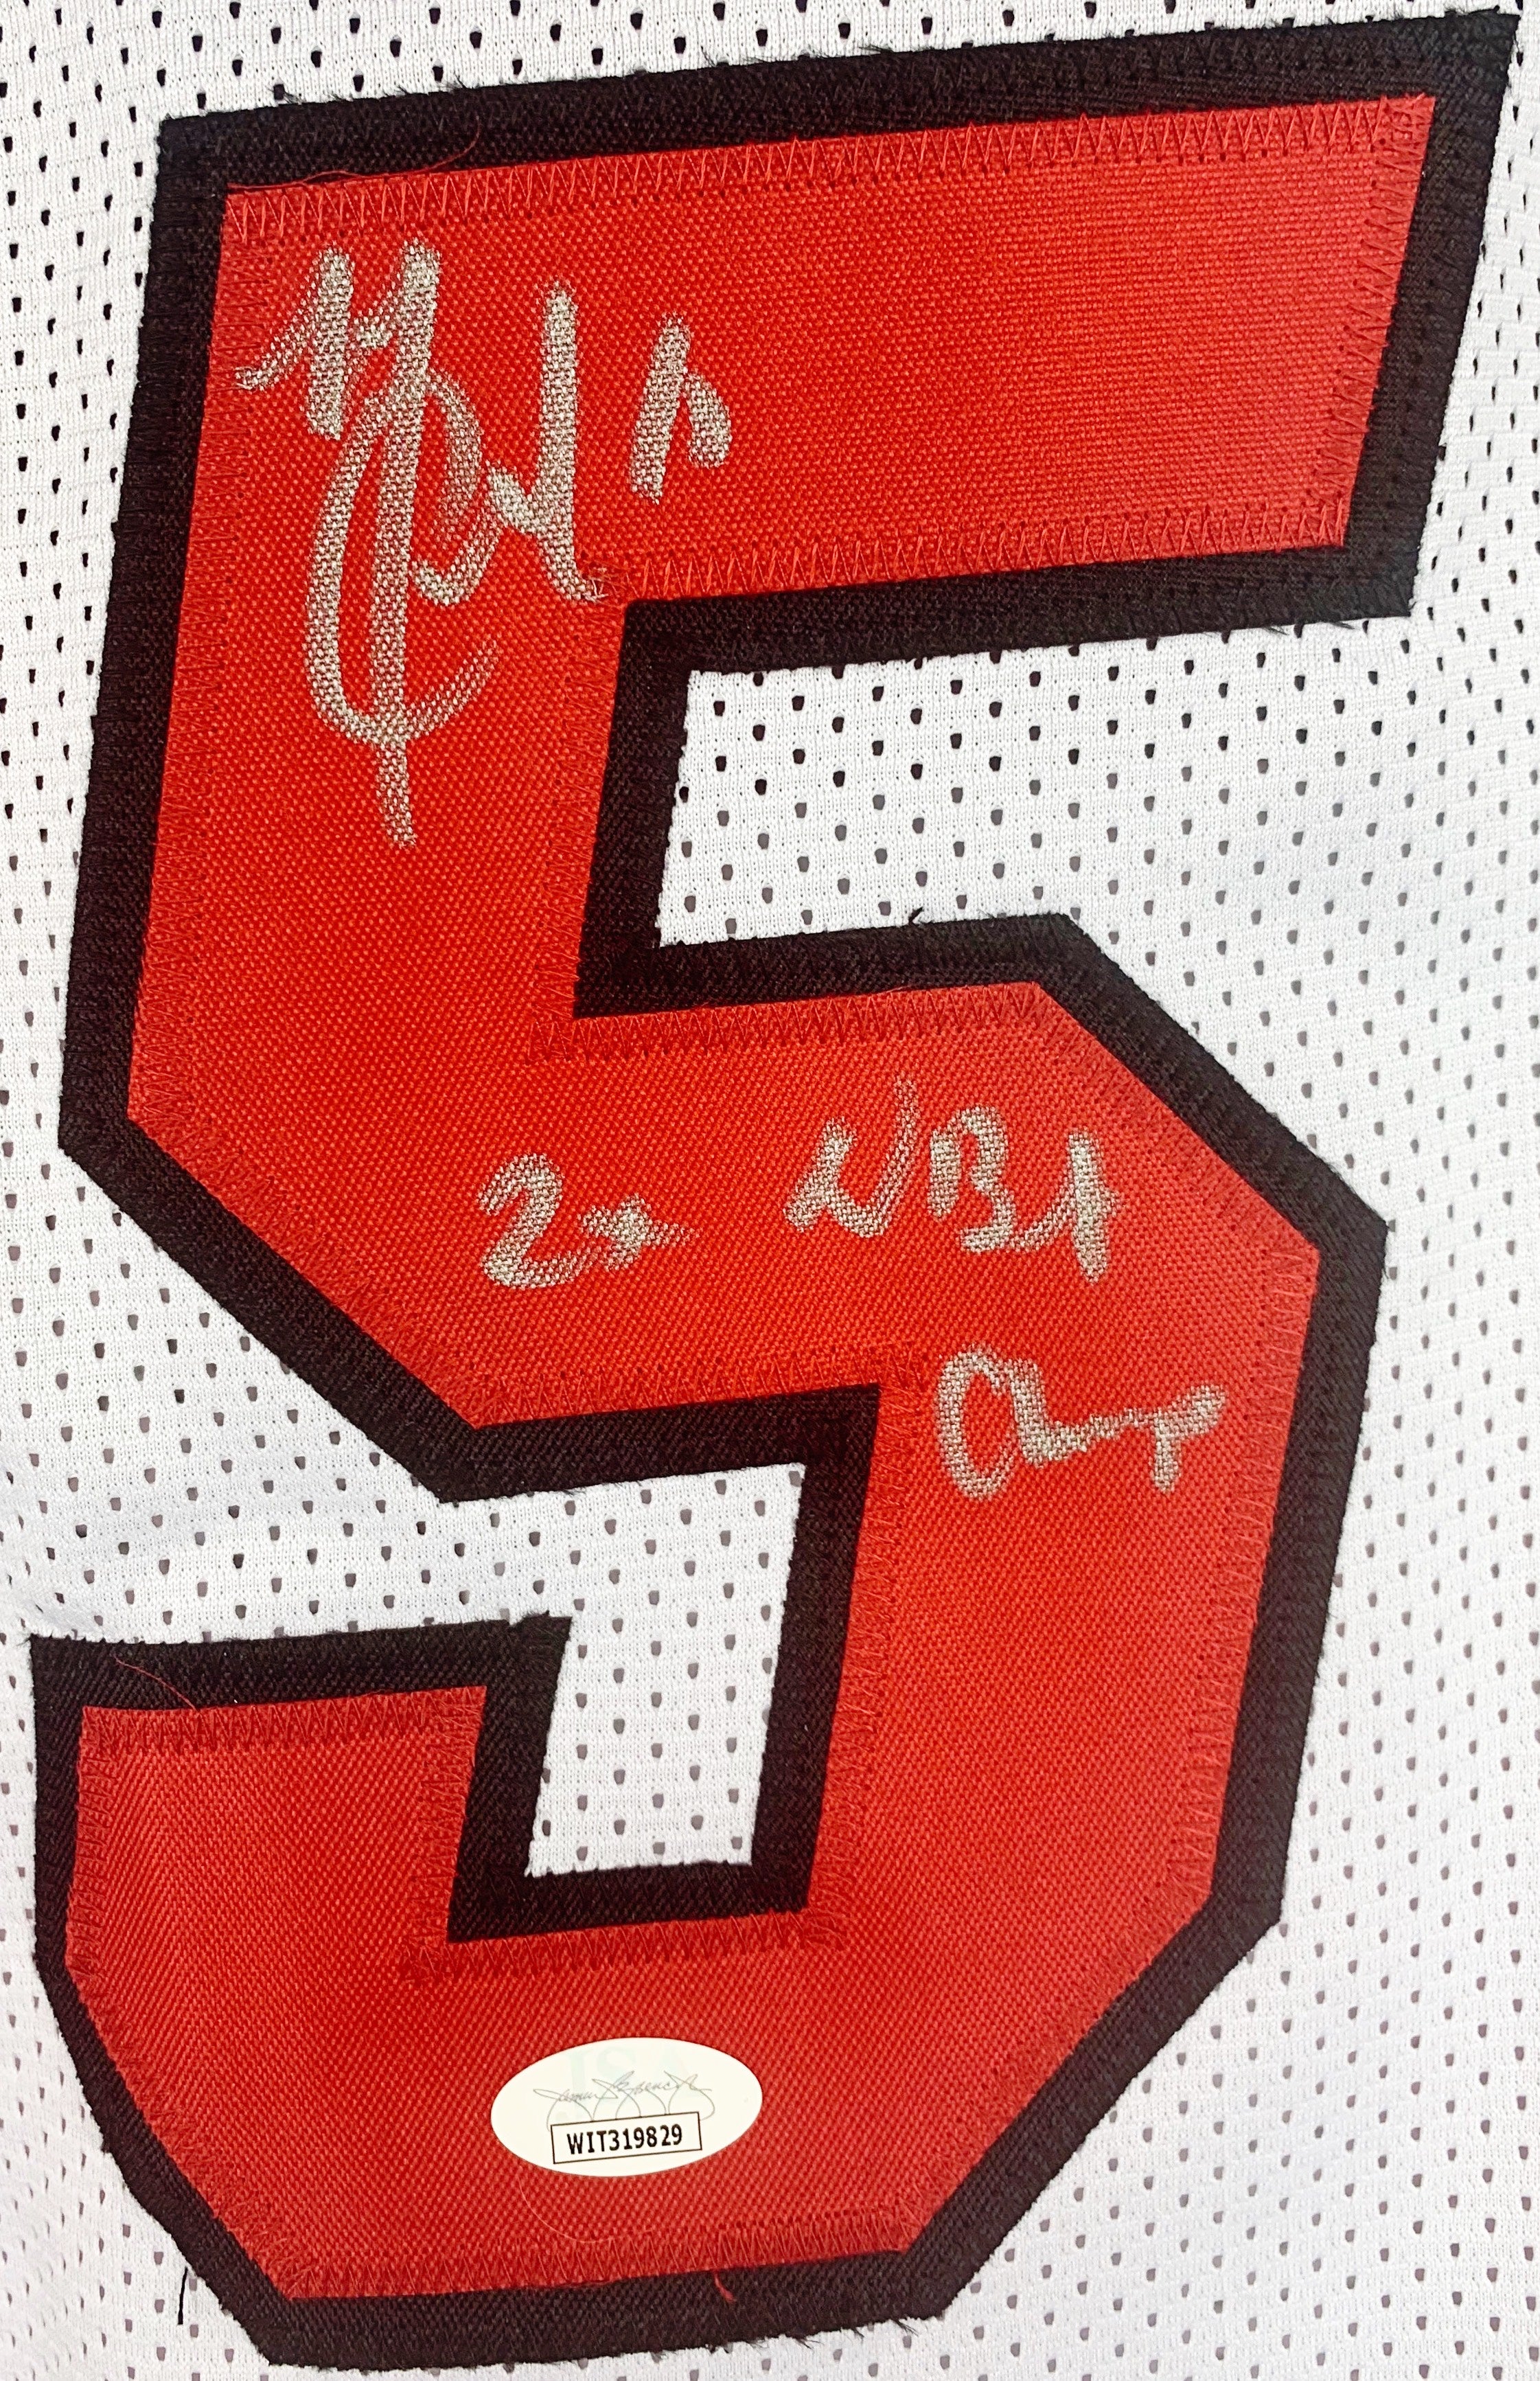 Autographed/signed Mario Chalmers Miami Red Basketball Jersey 